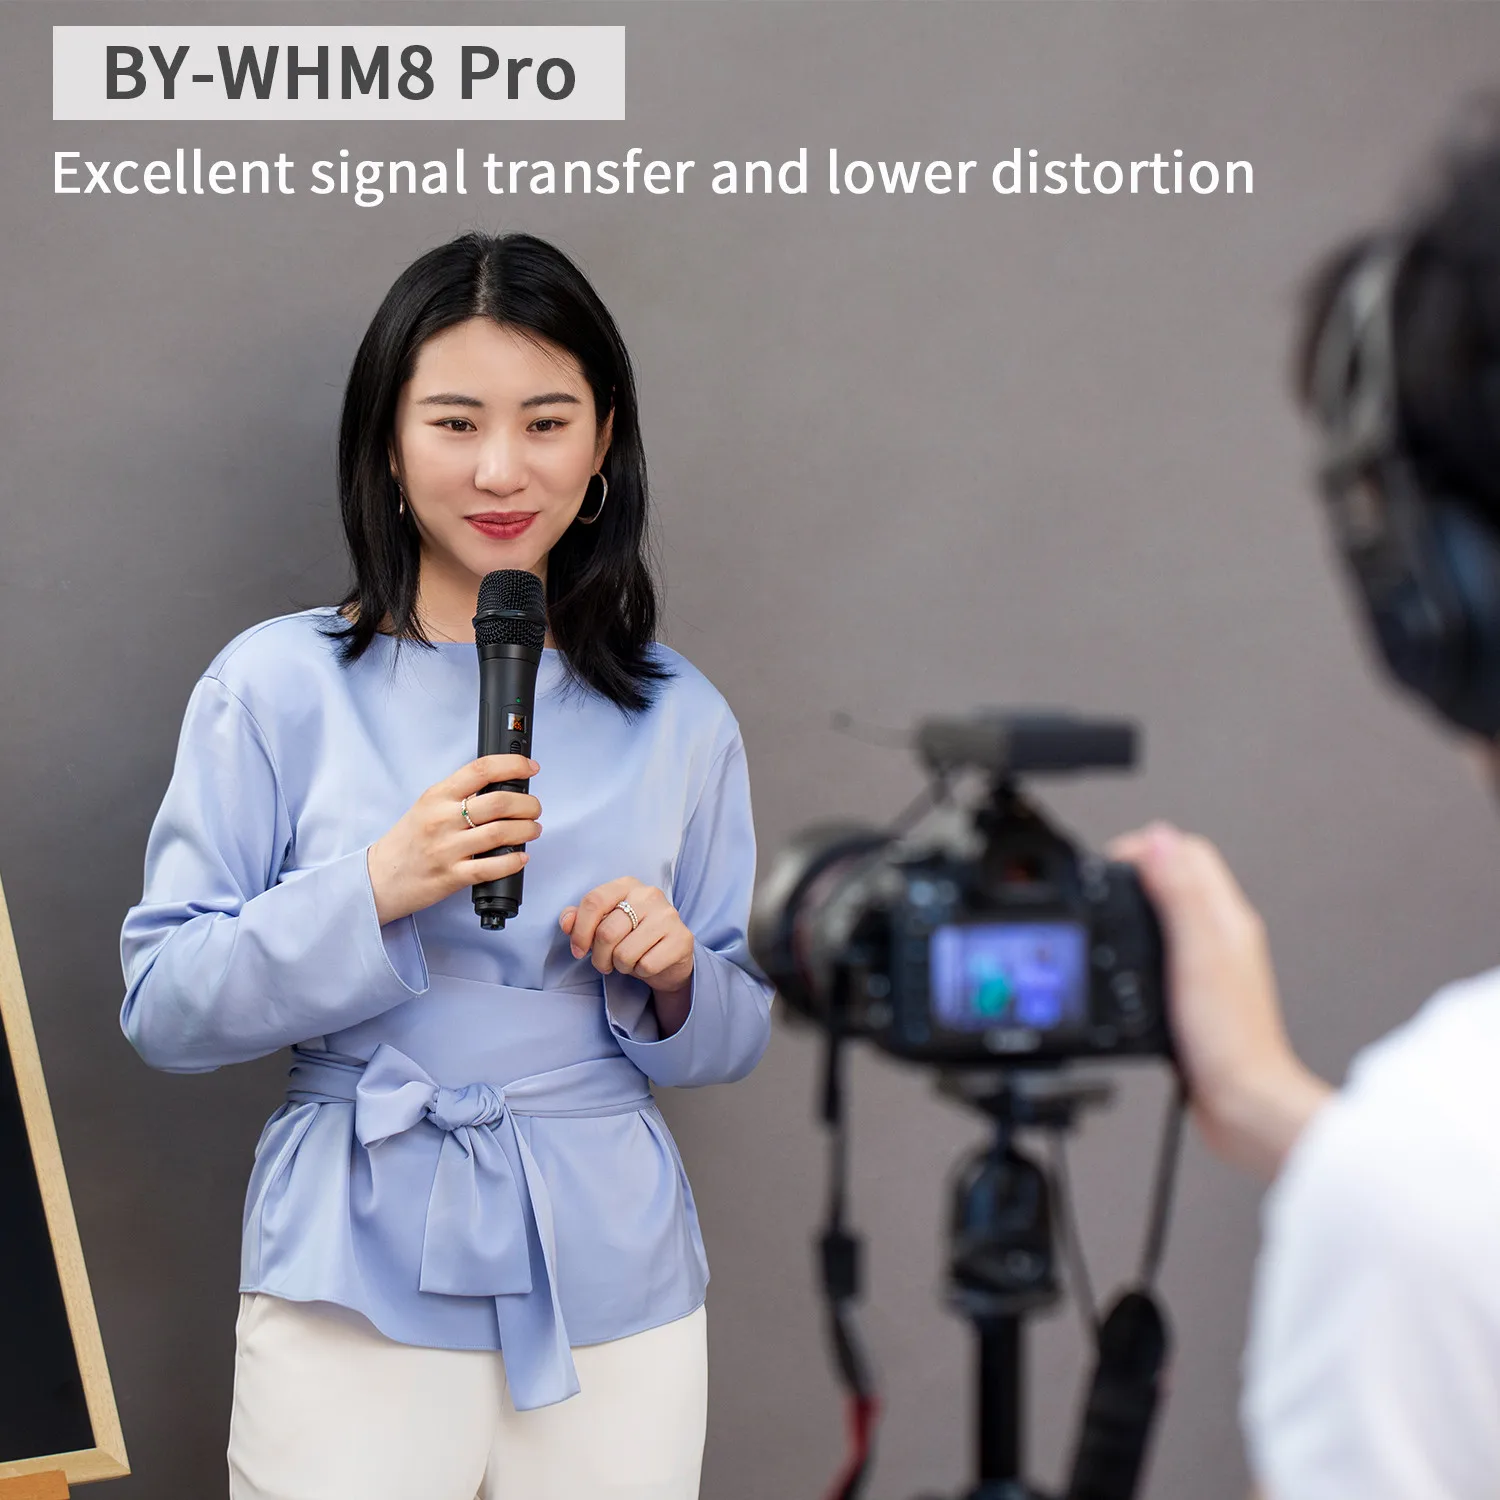 BOYA BY-WHM8 Pro UHF Wireless Handheld Microphone 48 Channels OLED Display Dynamic Mic for BY-WM8 Pro K1 K2 Kit Receiver RX8 Pro images - 6